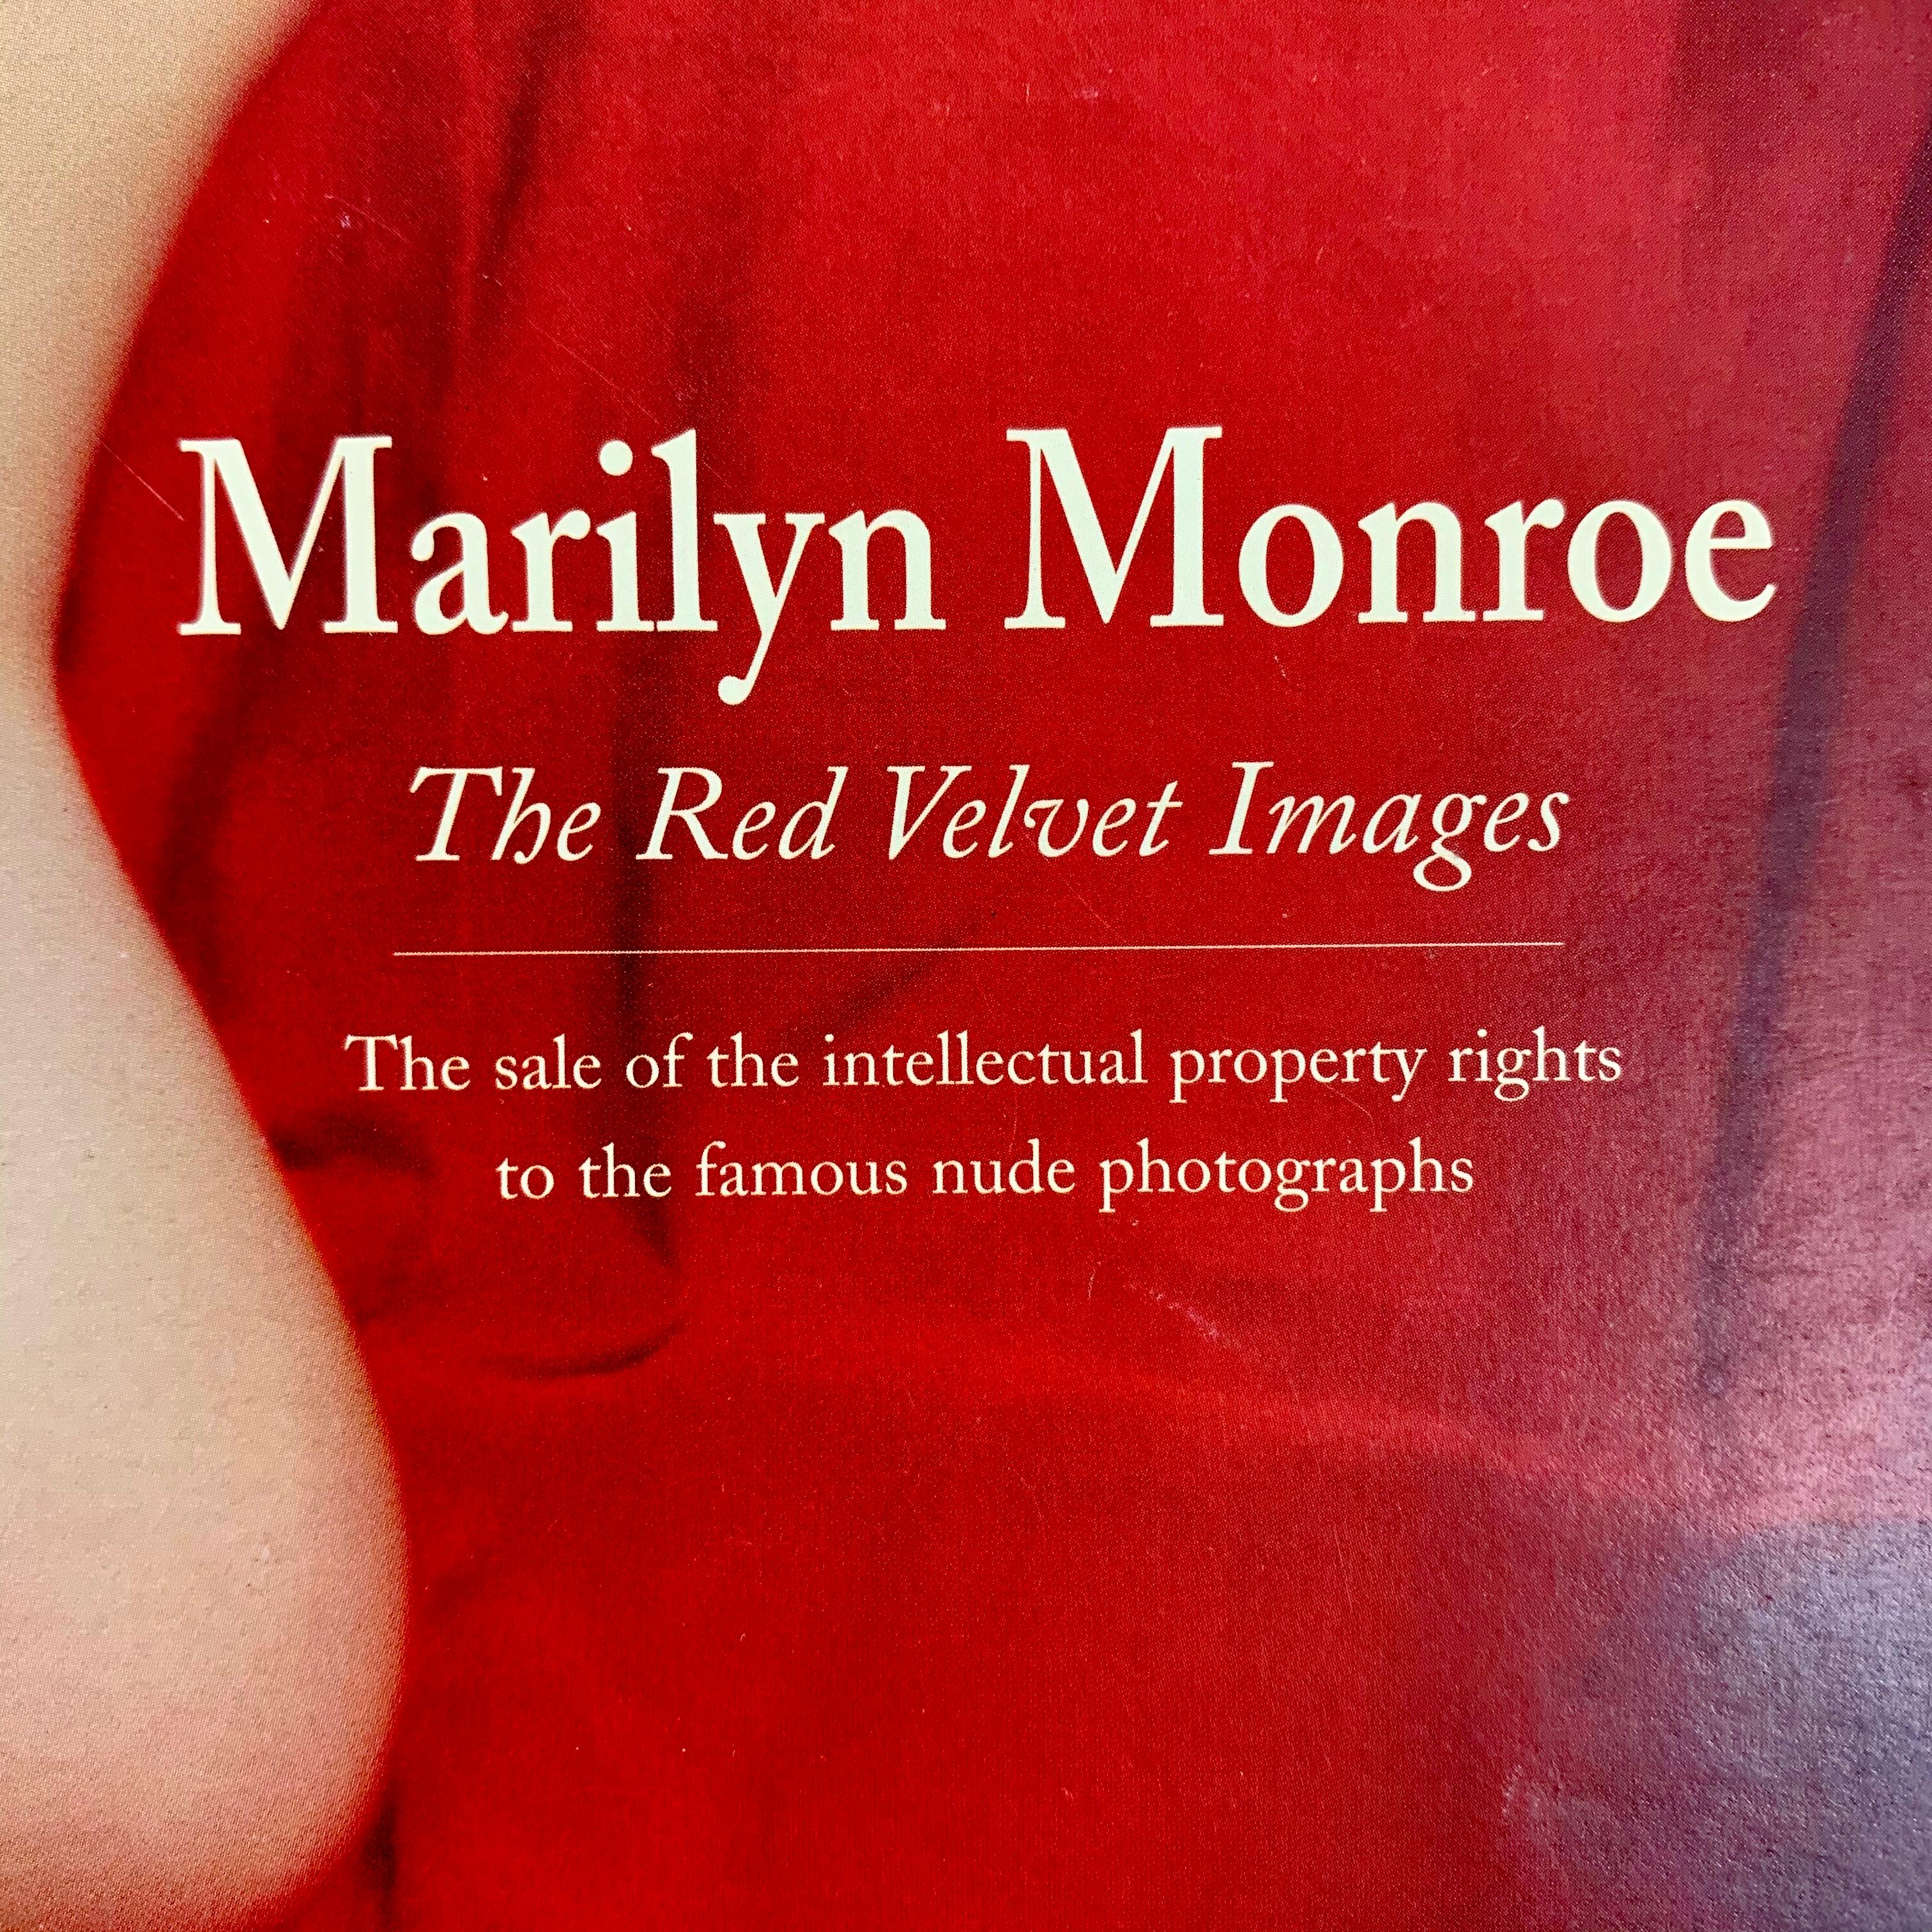 An auction catalogue from Butterfields’ Los Angeles sale of The Marilyn Monroe Red Velvet Images, photographed in 1948.

The sale featured the Red Velvet images along with the intellectual property rights to the famous nude photos, film